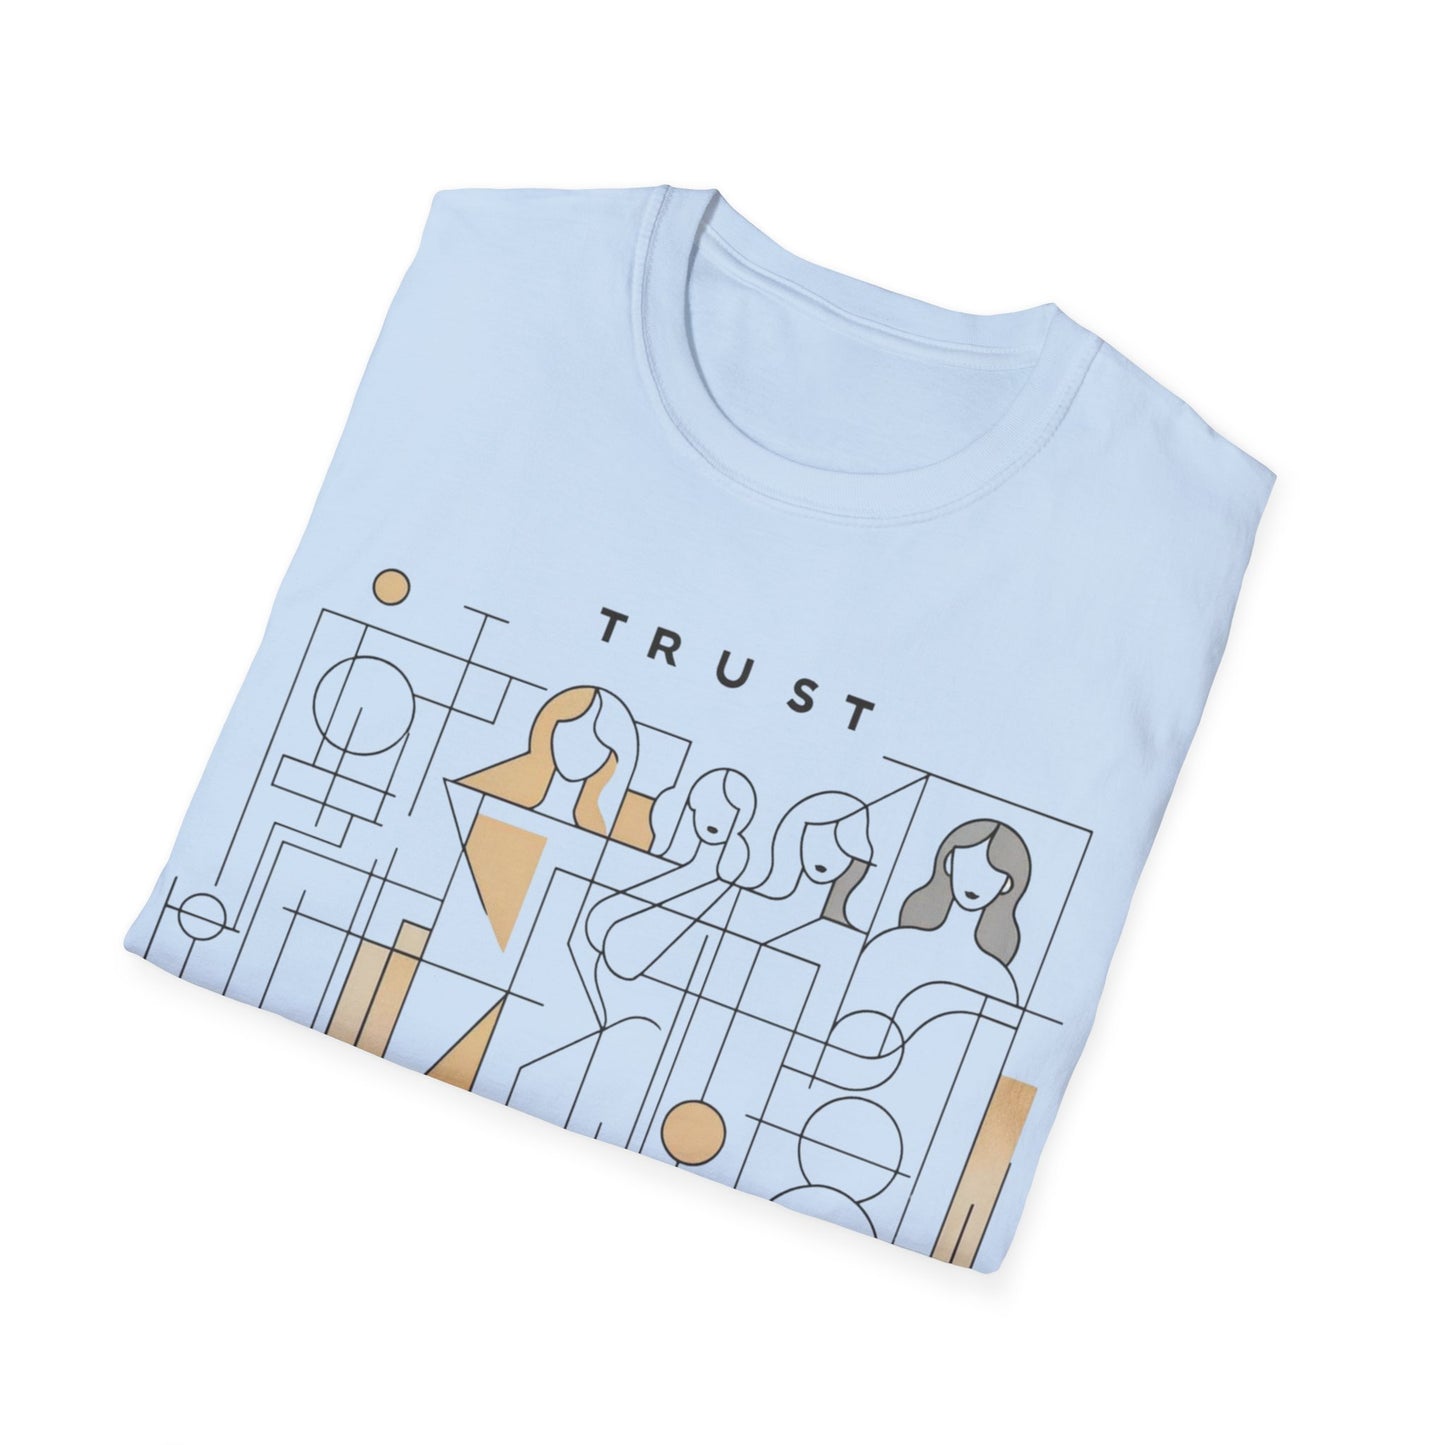 Trust Women Bold Statement Soft Style T-Shirt |unisex| Political Activism, Demand Equality and Respect!